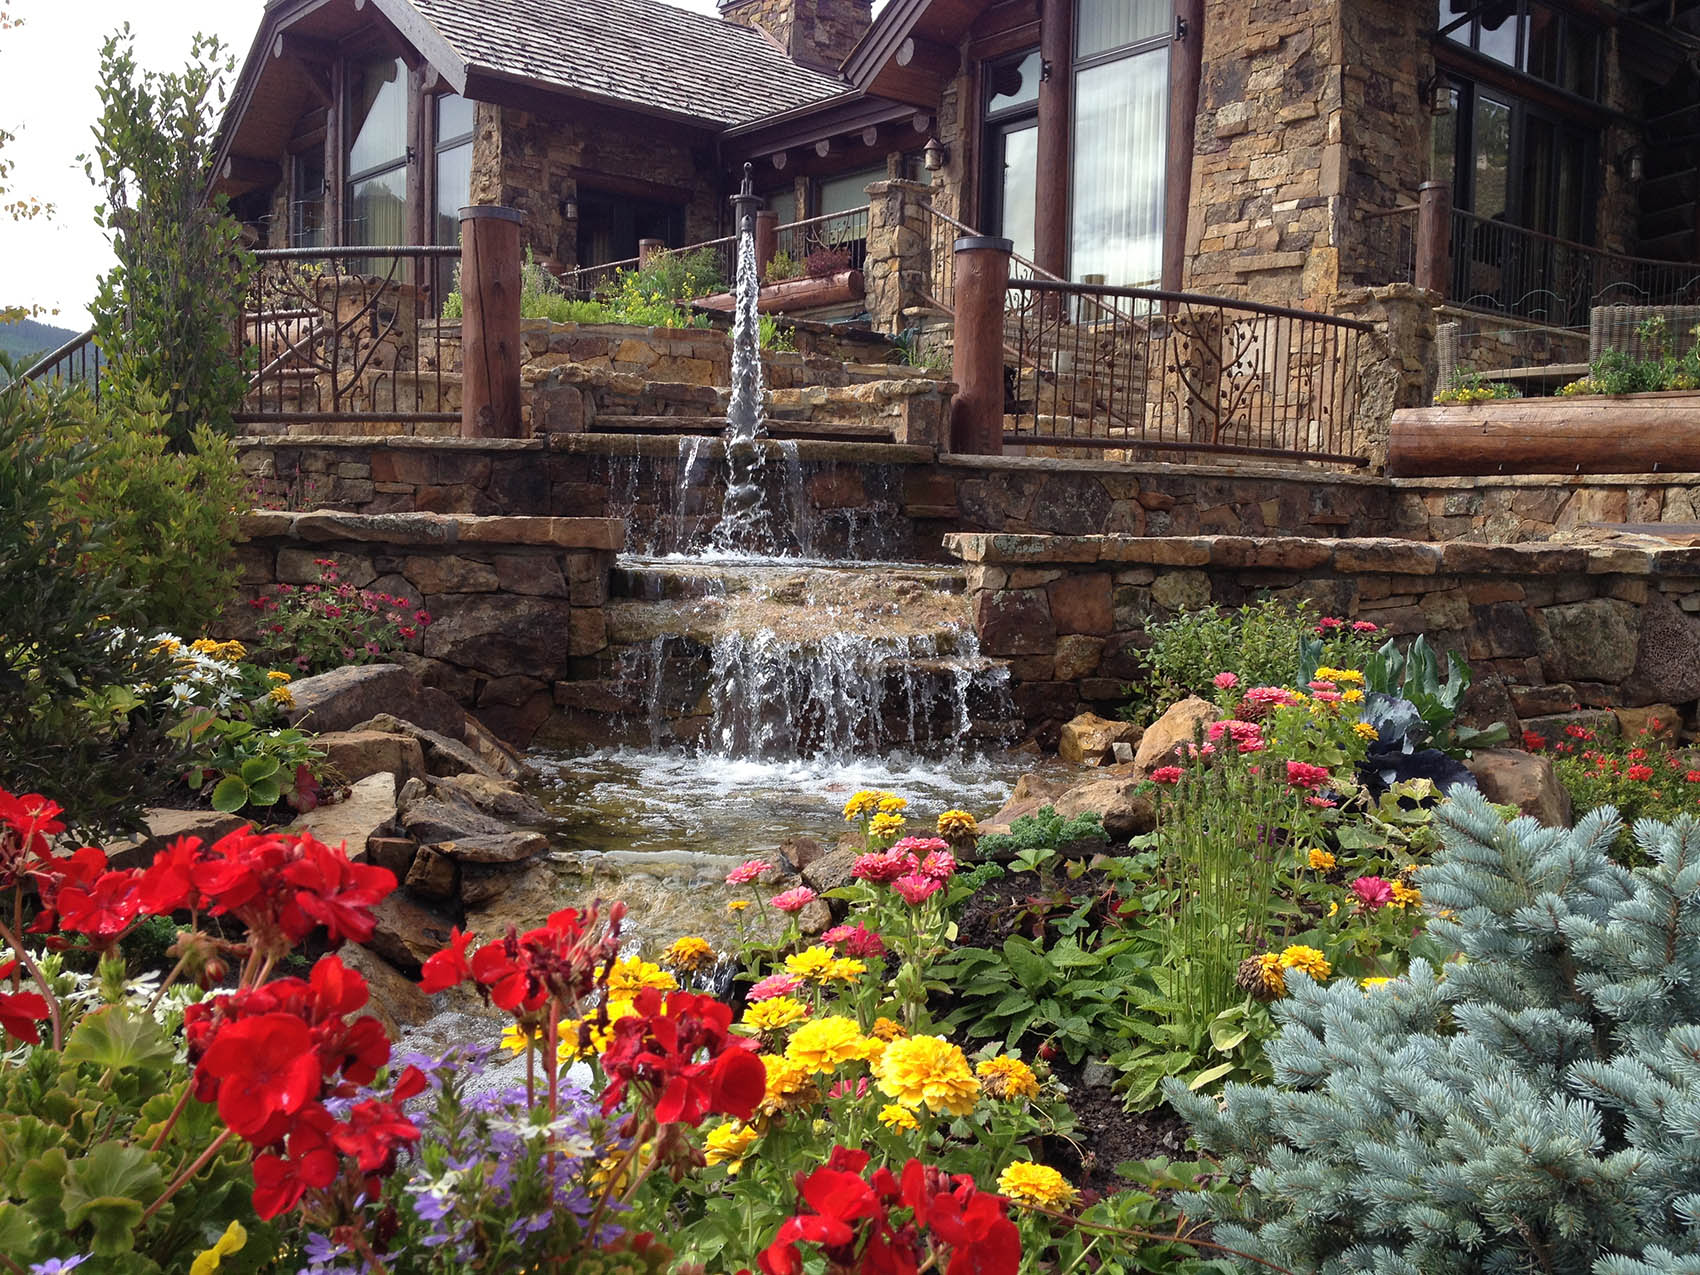 A rustic stone house with wooden beams features a multi-tier waterfall in a landscaped garden full of colorful flowers, including reds, yellows, and purples.